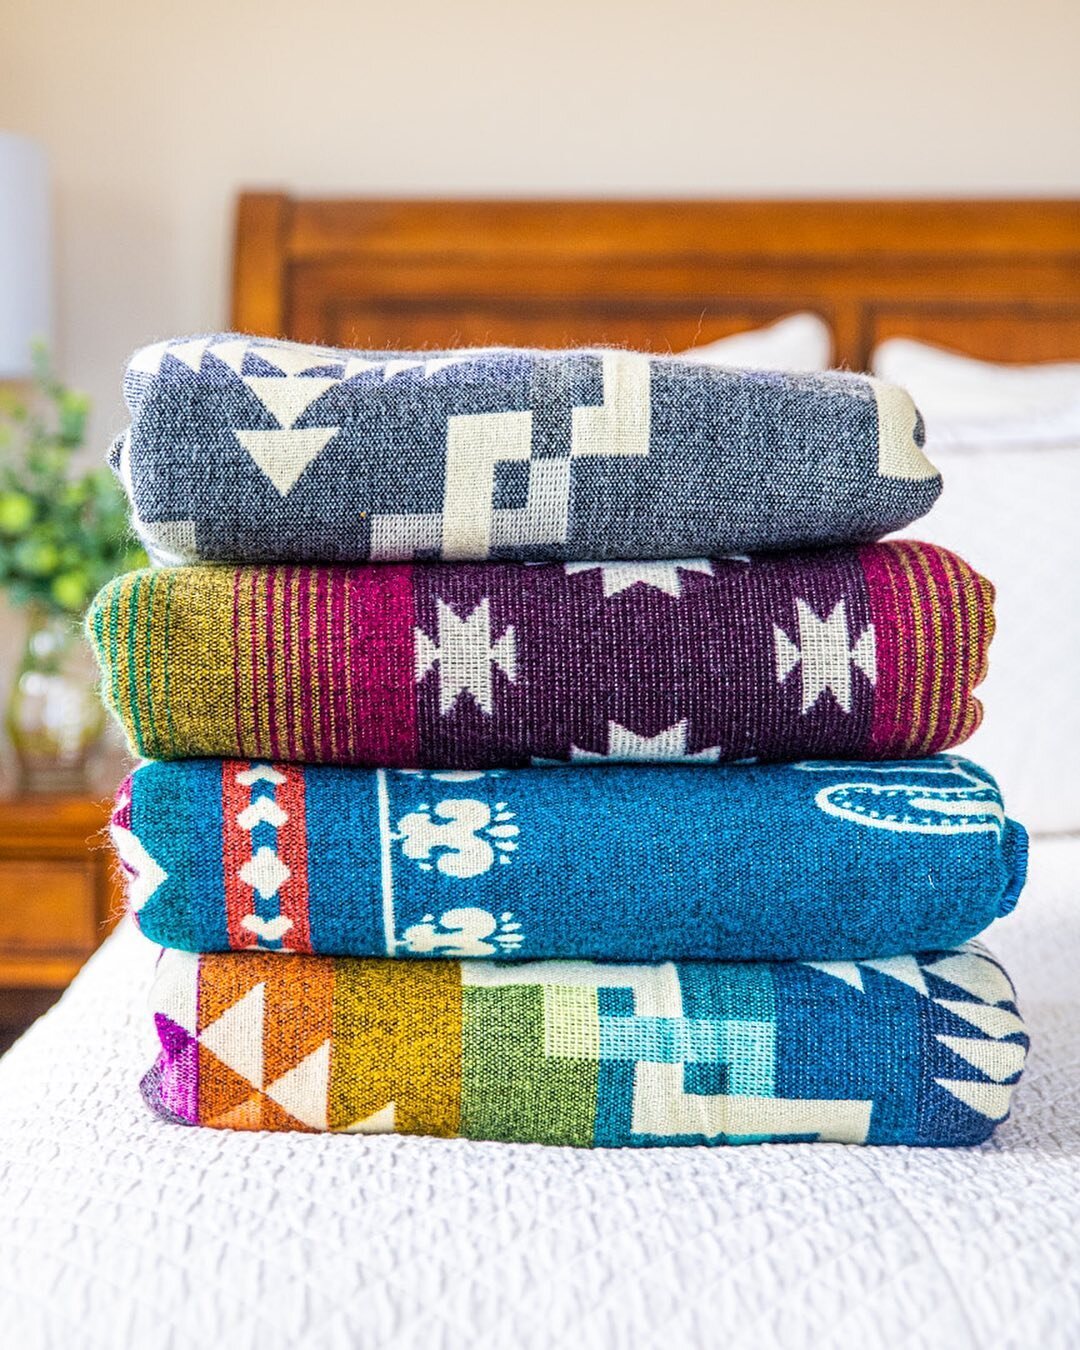 We owned four of these @loom_colorado blankets before I met the owner - so when she reached out for photography I was thrilled! These blankets are so soft and support a local, woman-owned business. We got ours at @parisstreetmarket and I know they&rs